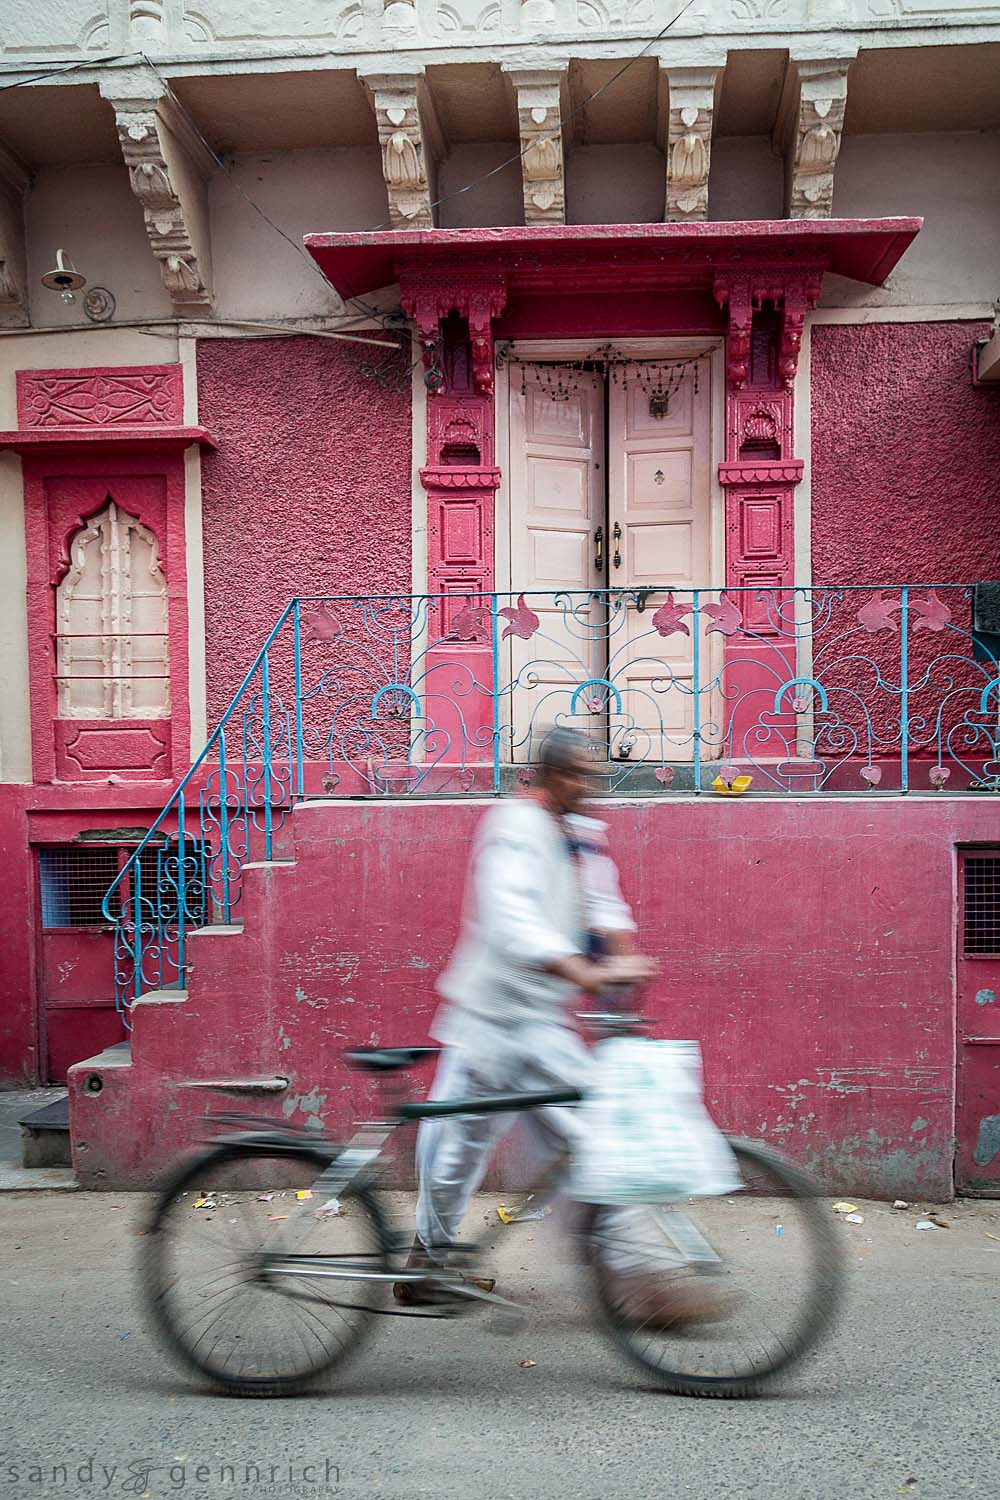 The Pink House-India in Motion-Jodhpur-India